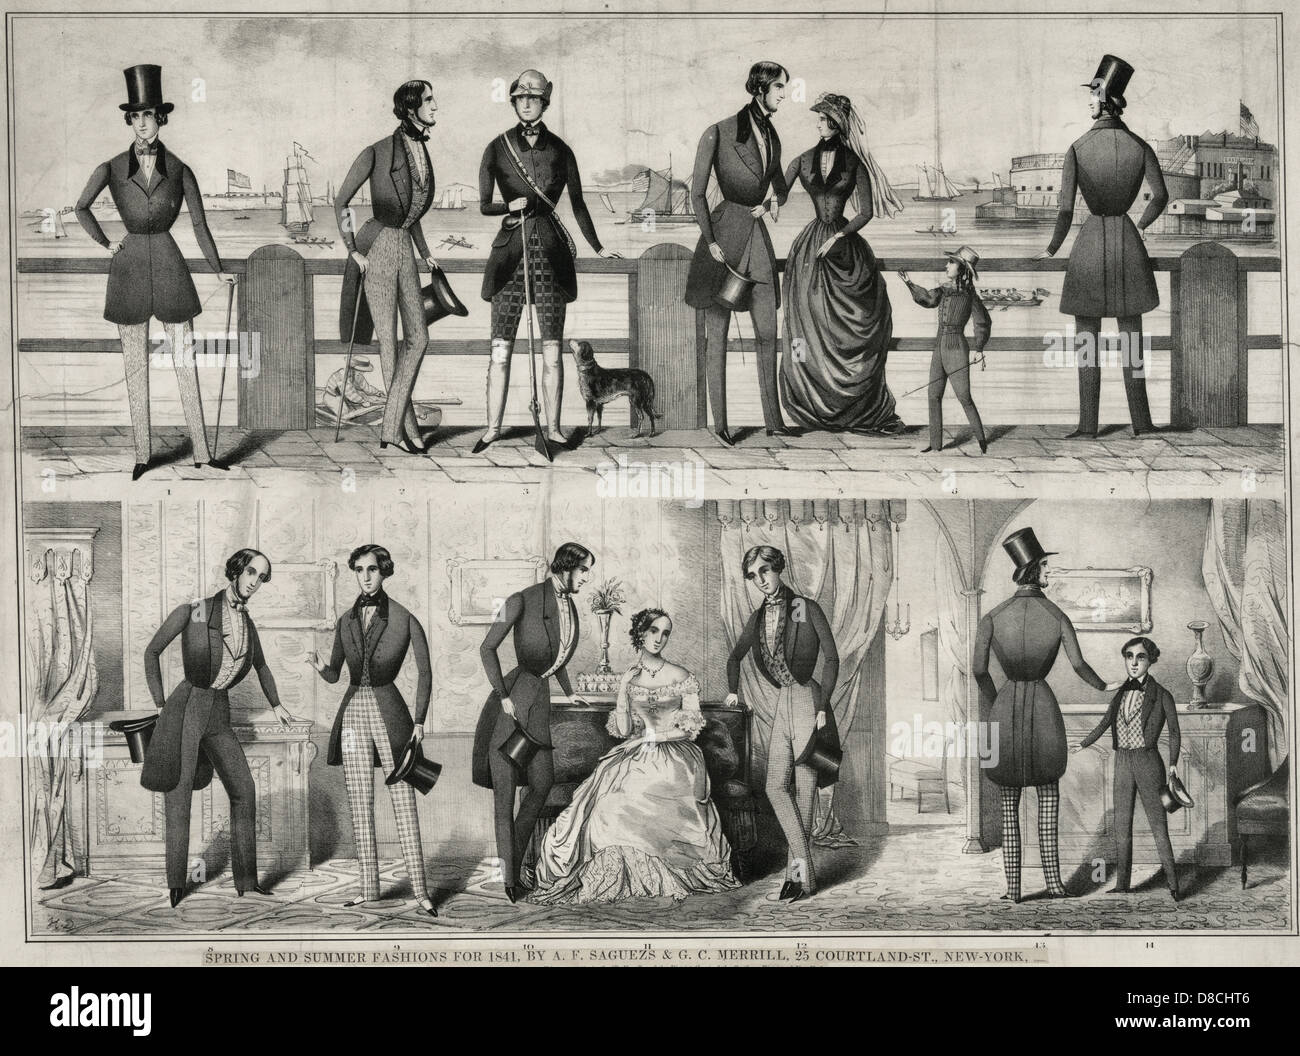 Spring and summer fashions for 1841, showing fine fashions for men and women for spring and summer, presented outdoor on a pier and indoors in a parlor. Stock Photo